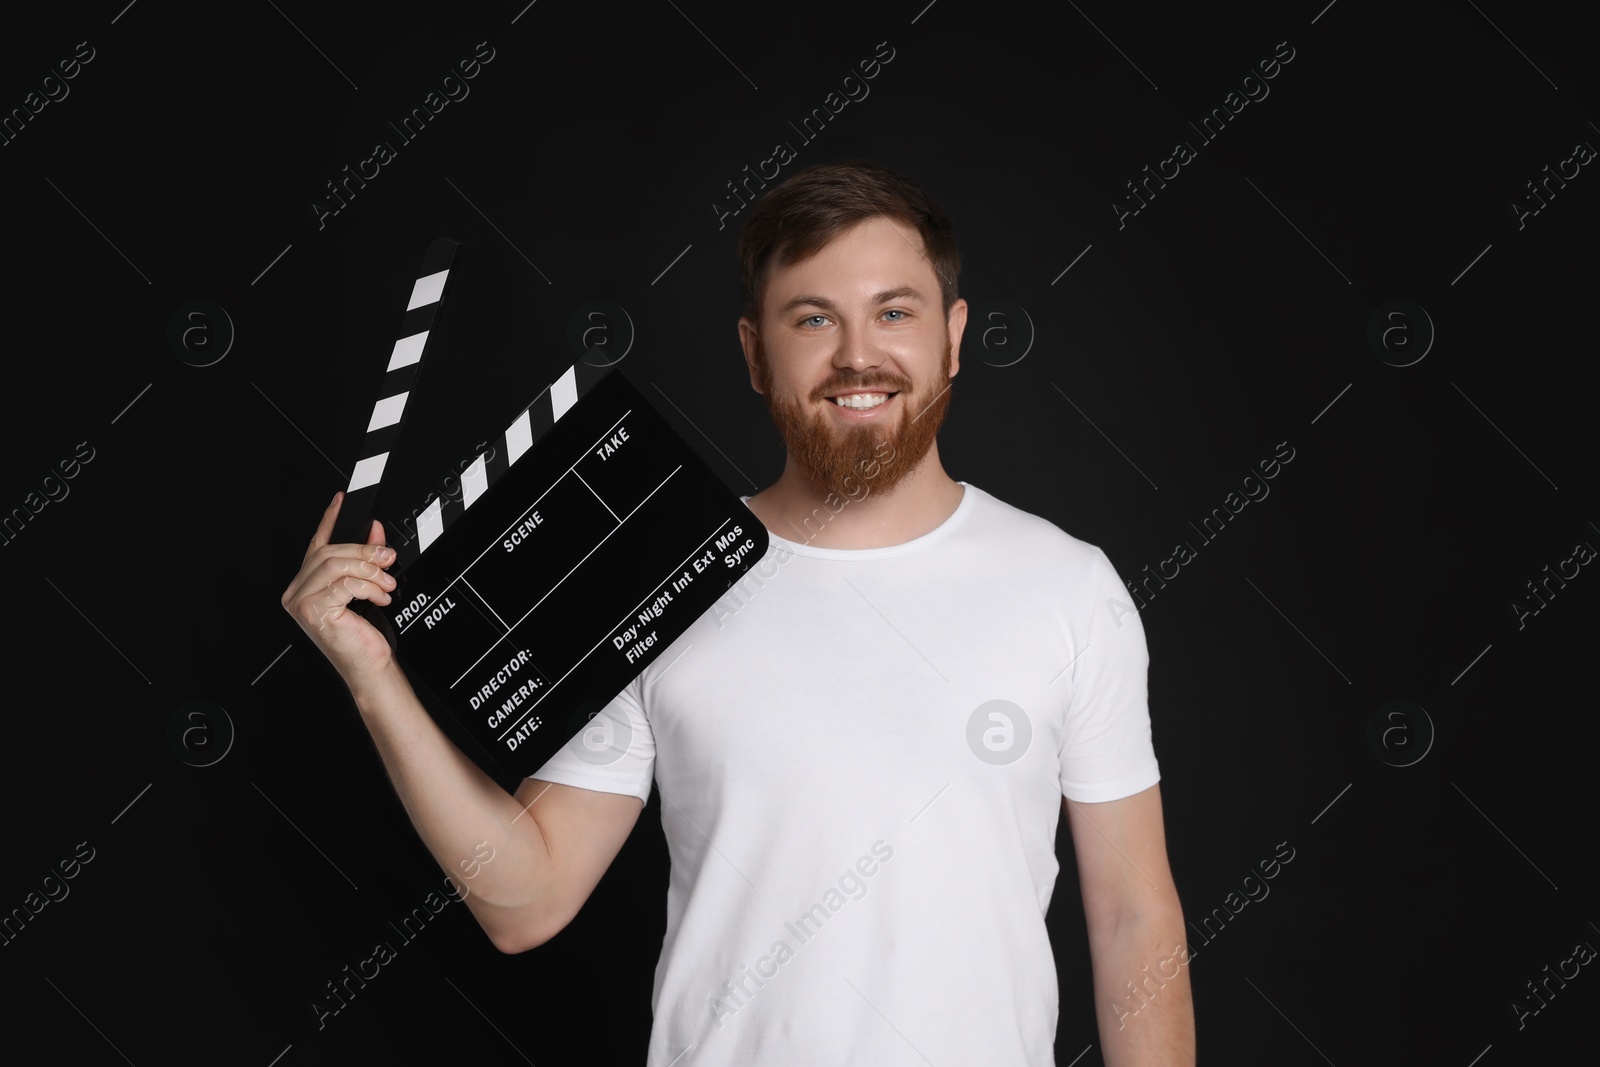 Photo of Making movie. Smiling man with clapperboard on black background